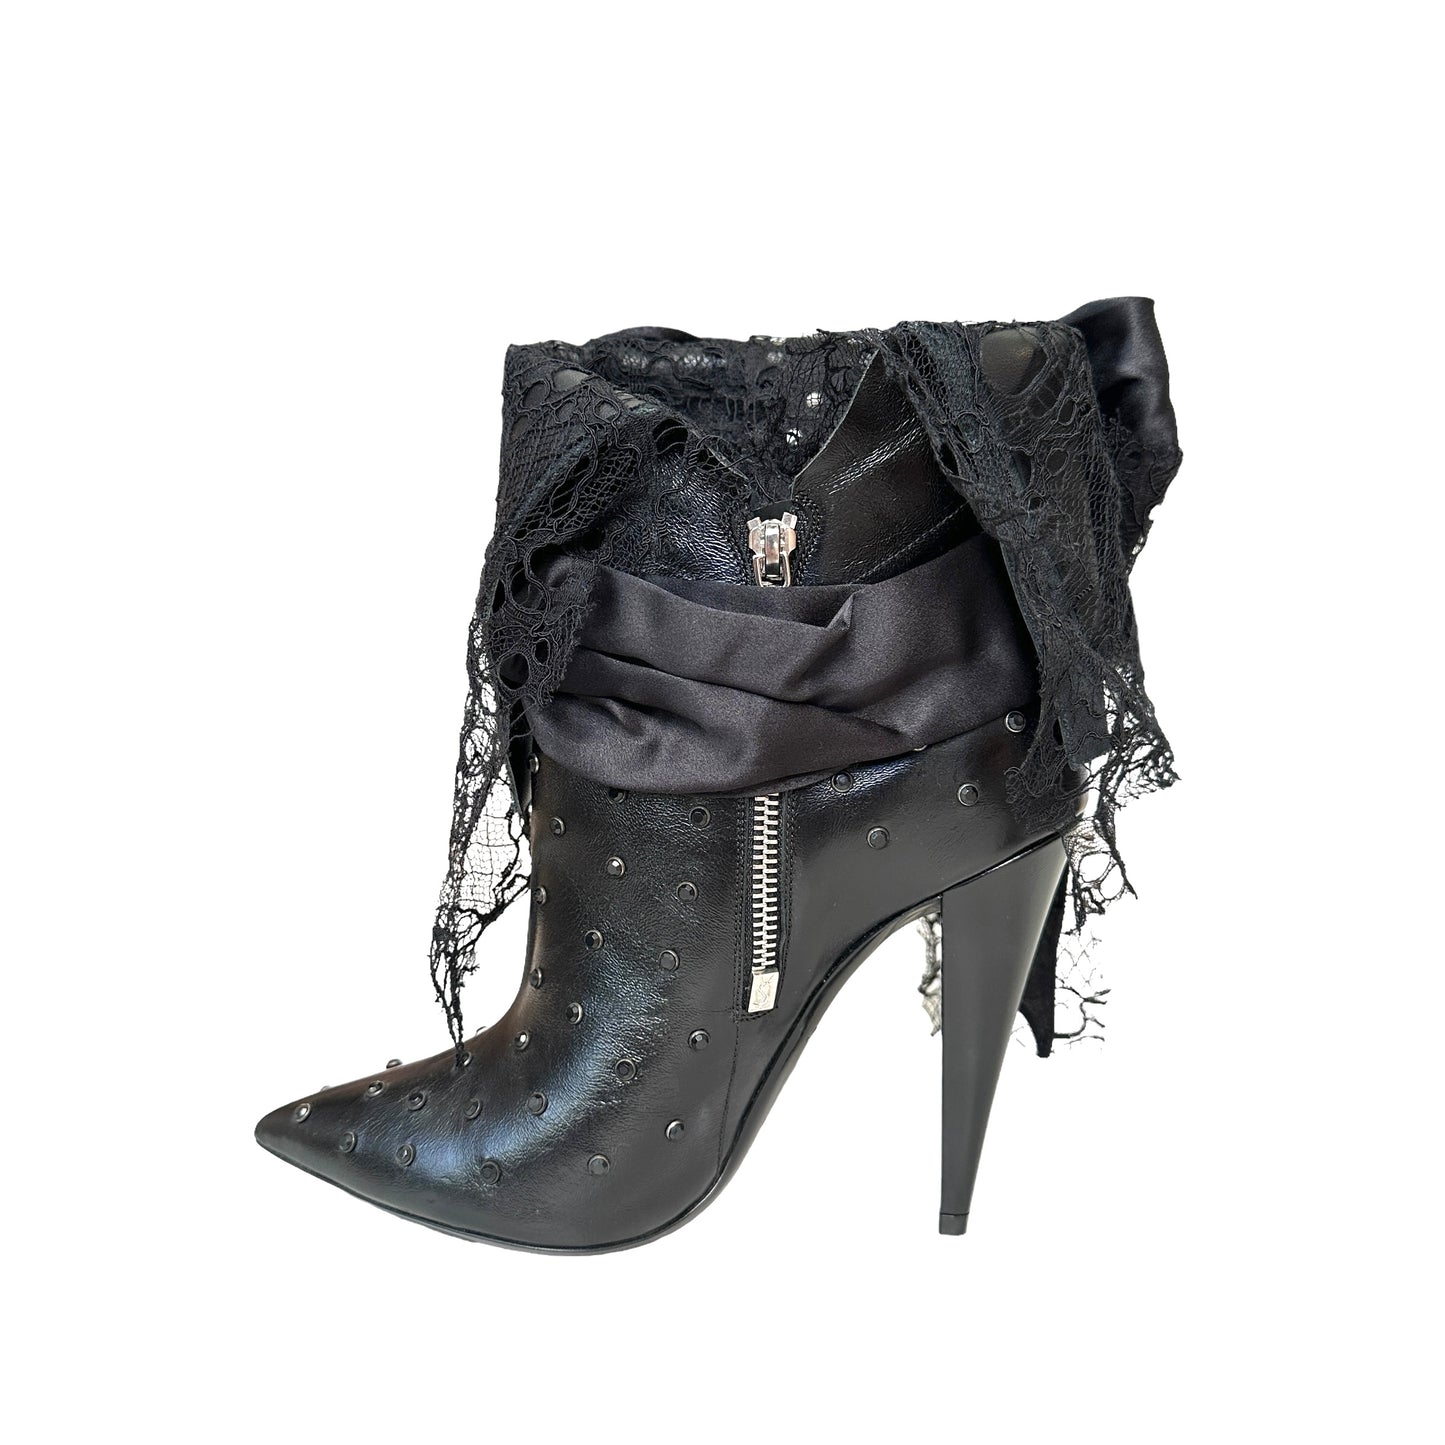 Black Studded & Laced Boots - 8.5